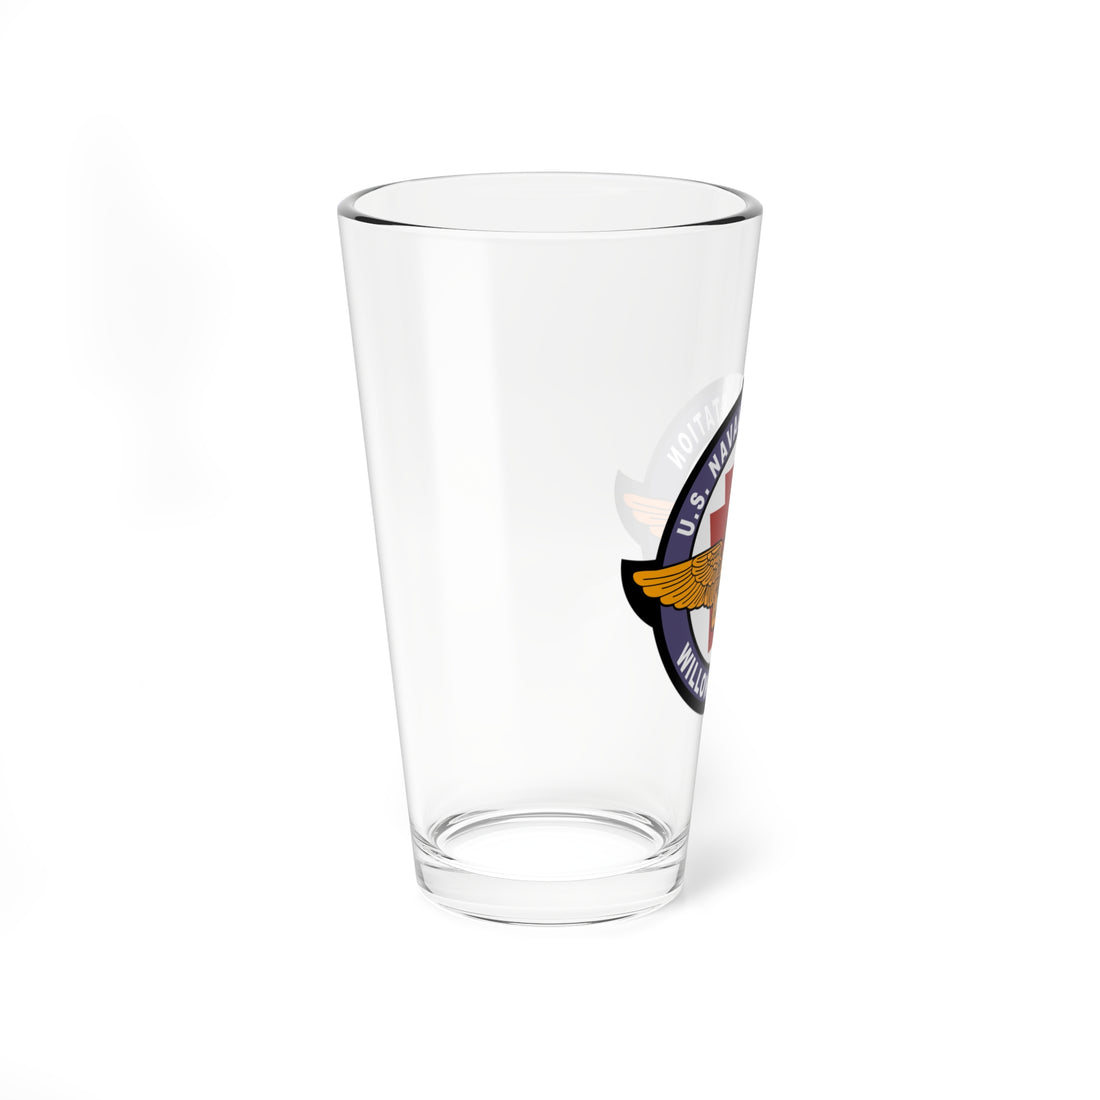 Naval Air Station Willow Grove Pint Glass, US Navy Air Station, later Joint Reserve Base